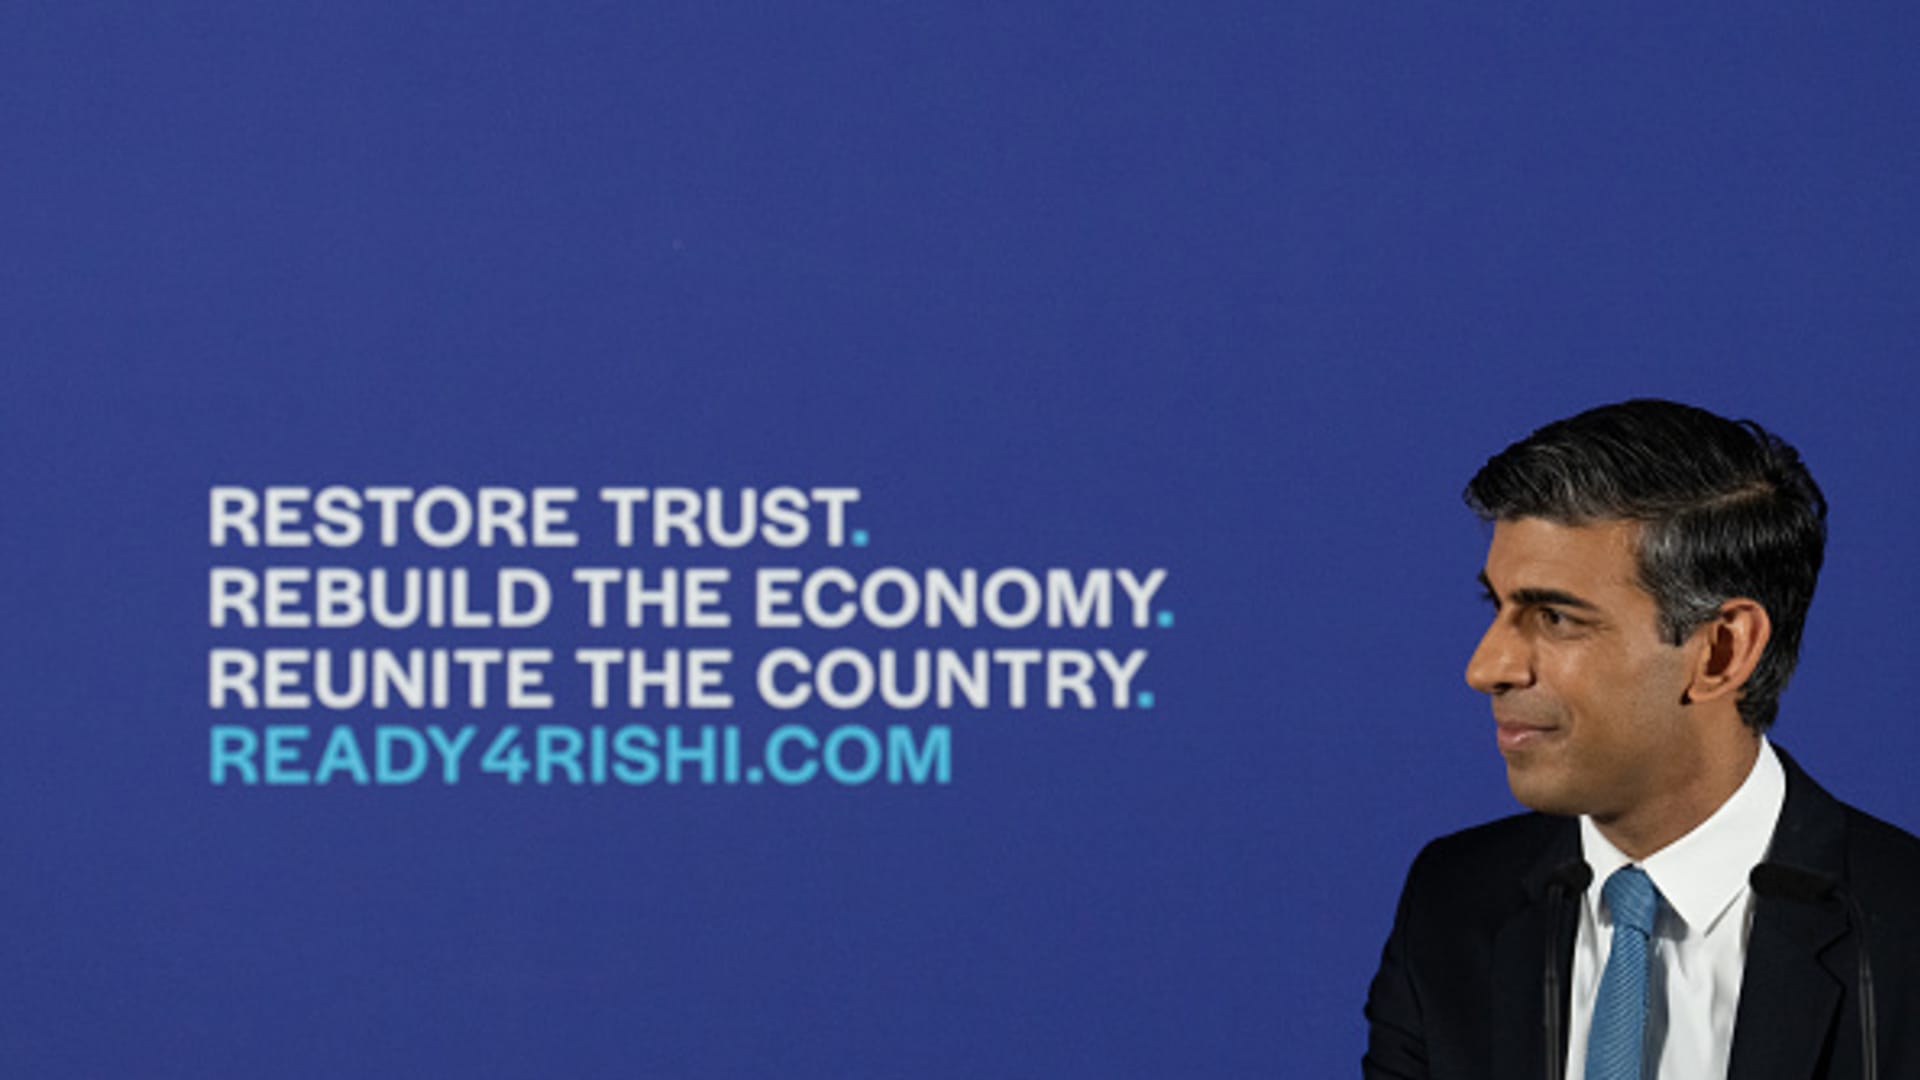 Rishi Sunak makes a speech to launch his bid to be leader of the Conservative Party on July 12, 2022 in London, England. The former Chancellor was the second high-profile minister to resign from Boris Johnson's cabinet last week setting in motion the events that saw Johnson step down as Conservative Party Leader.